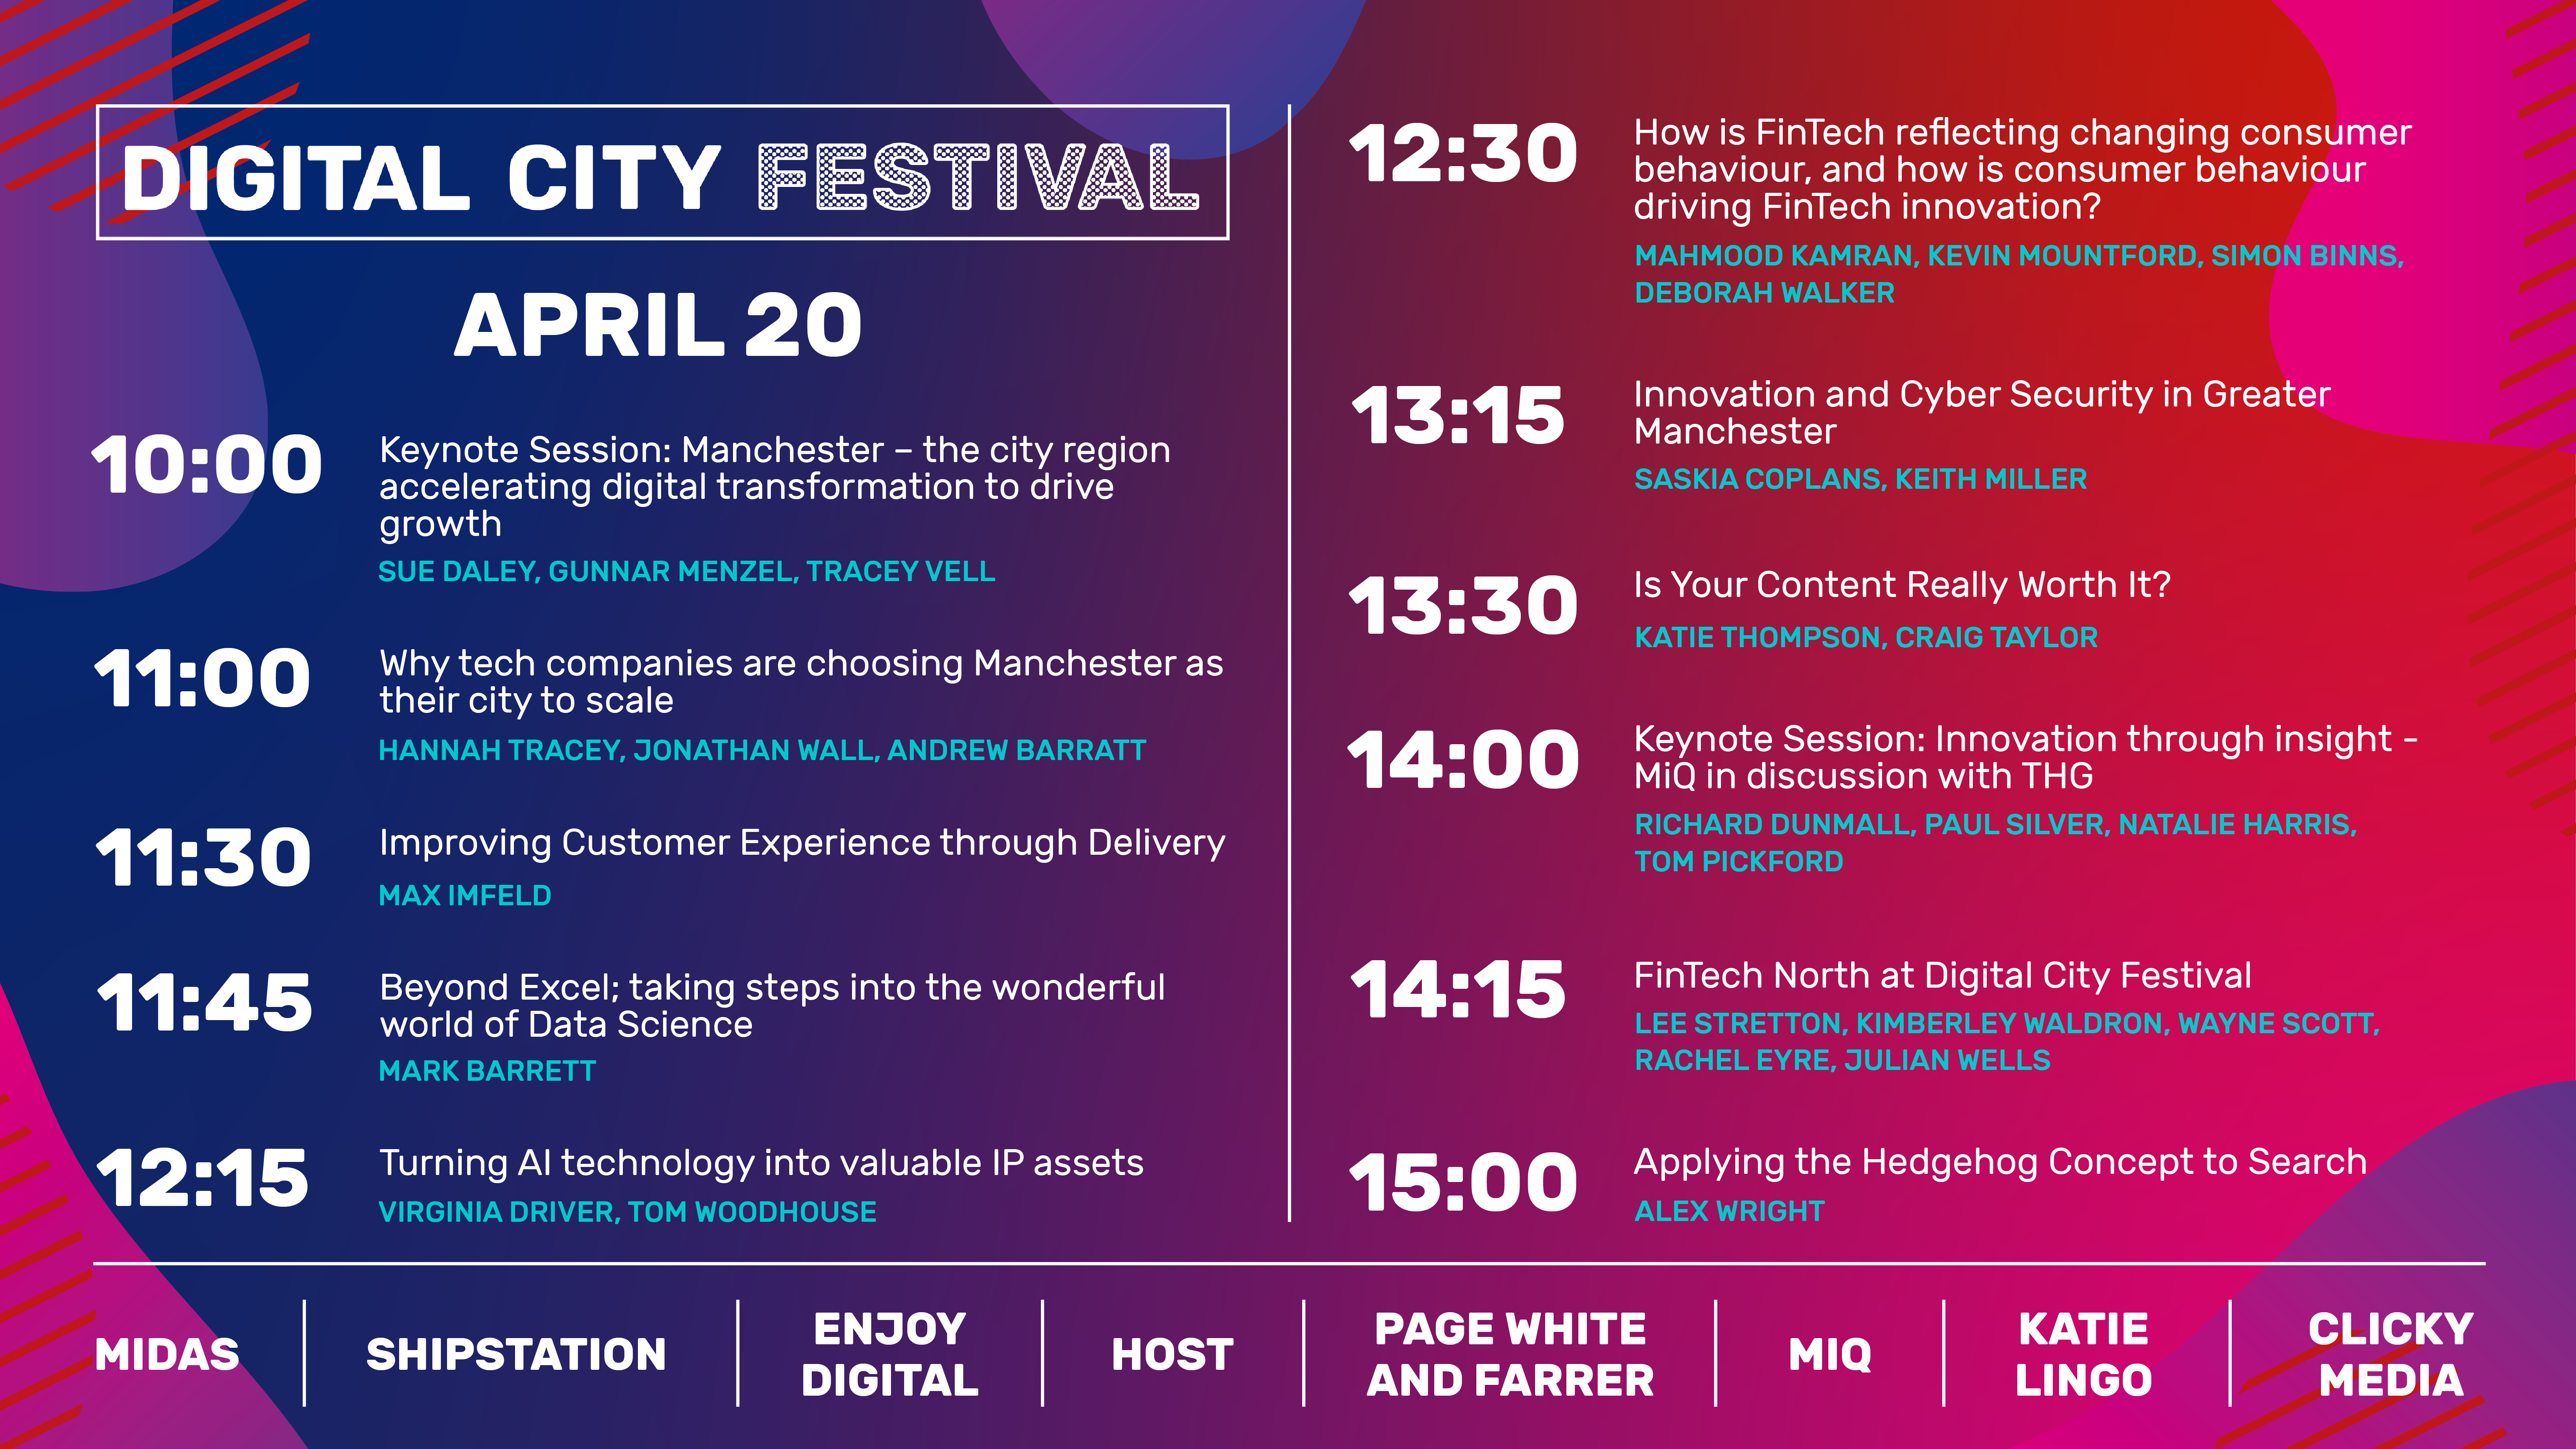 TUESDAY 20: Festival continues at pace with panels and talks featuring The Hut Group, techUK, FinGo and eToro